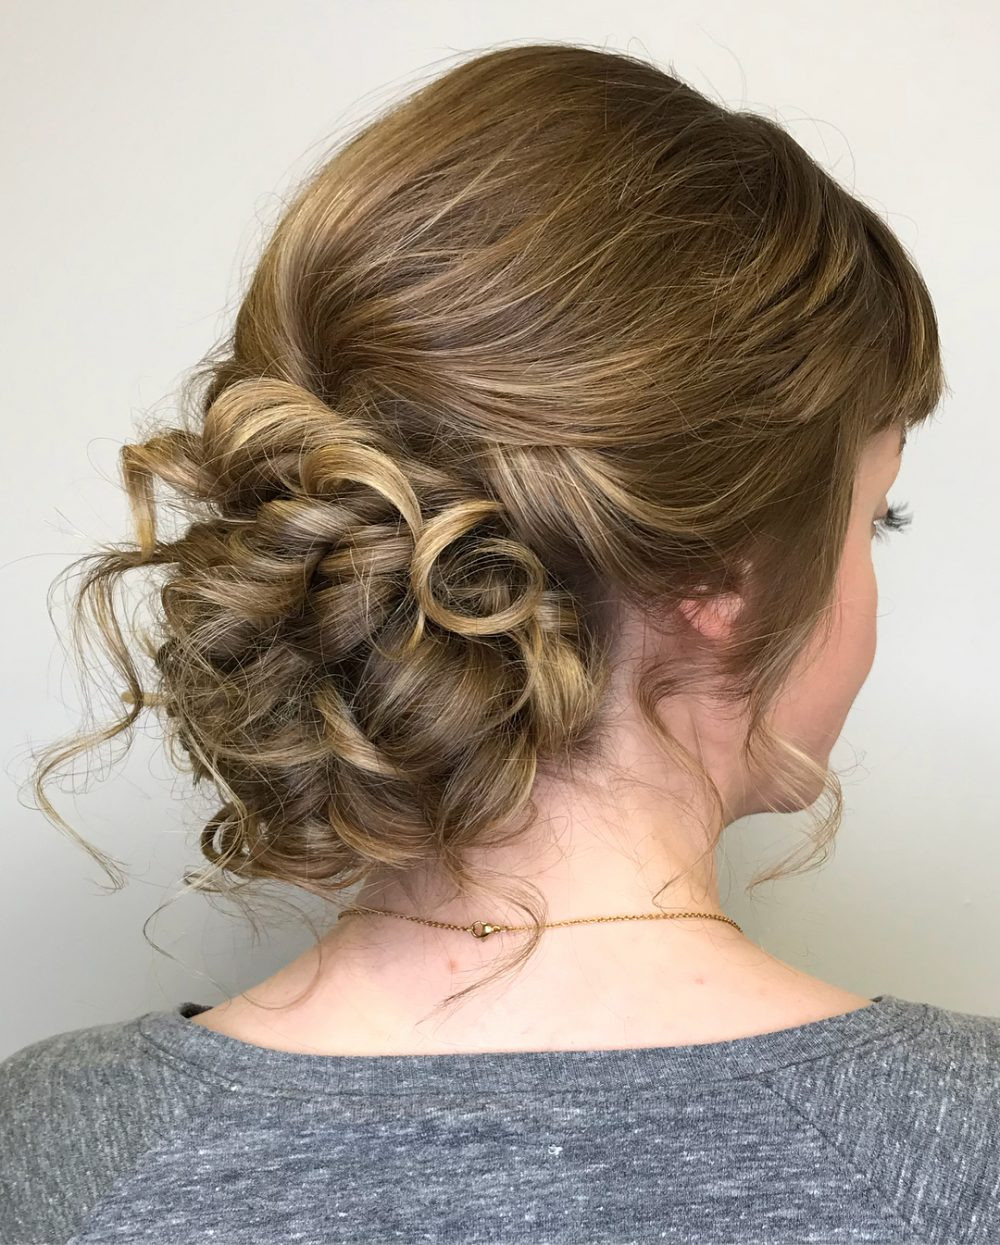 Hairstyle Updos Prom
 23 Cute Prom Hairstyles for 2020 Updos Braids Half Ups